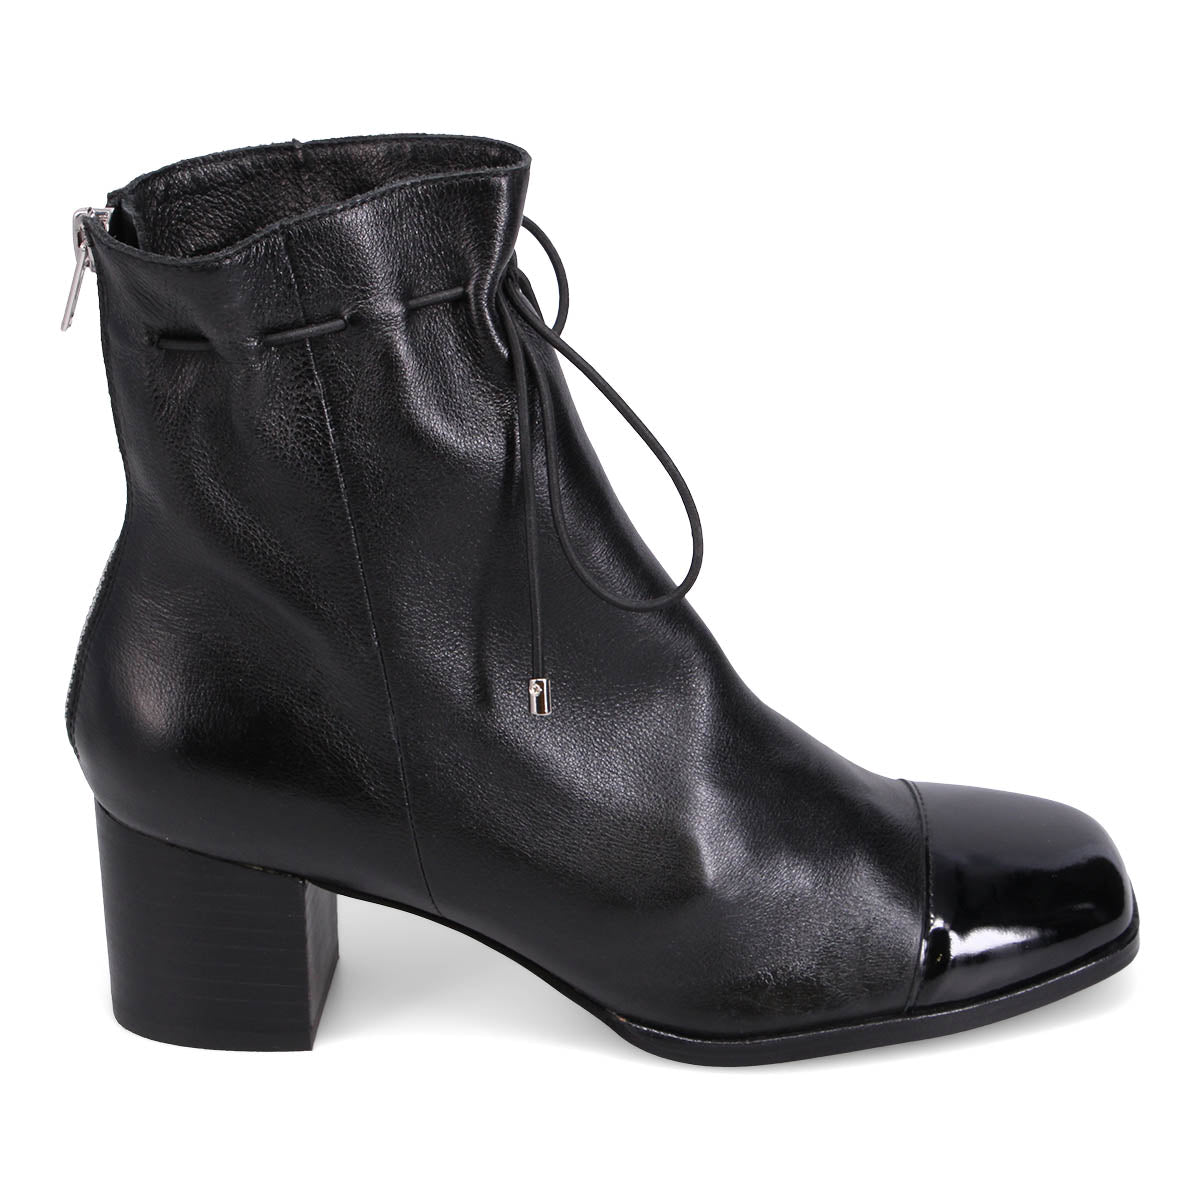 BLACK PATENT/LEATHER | Right